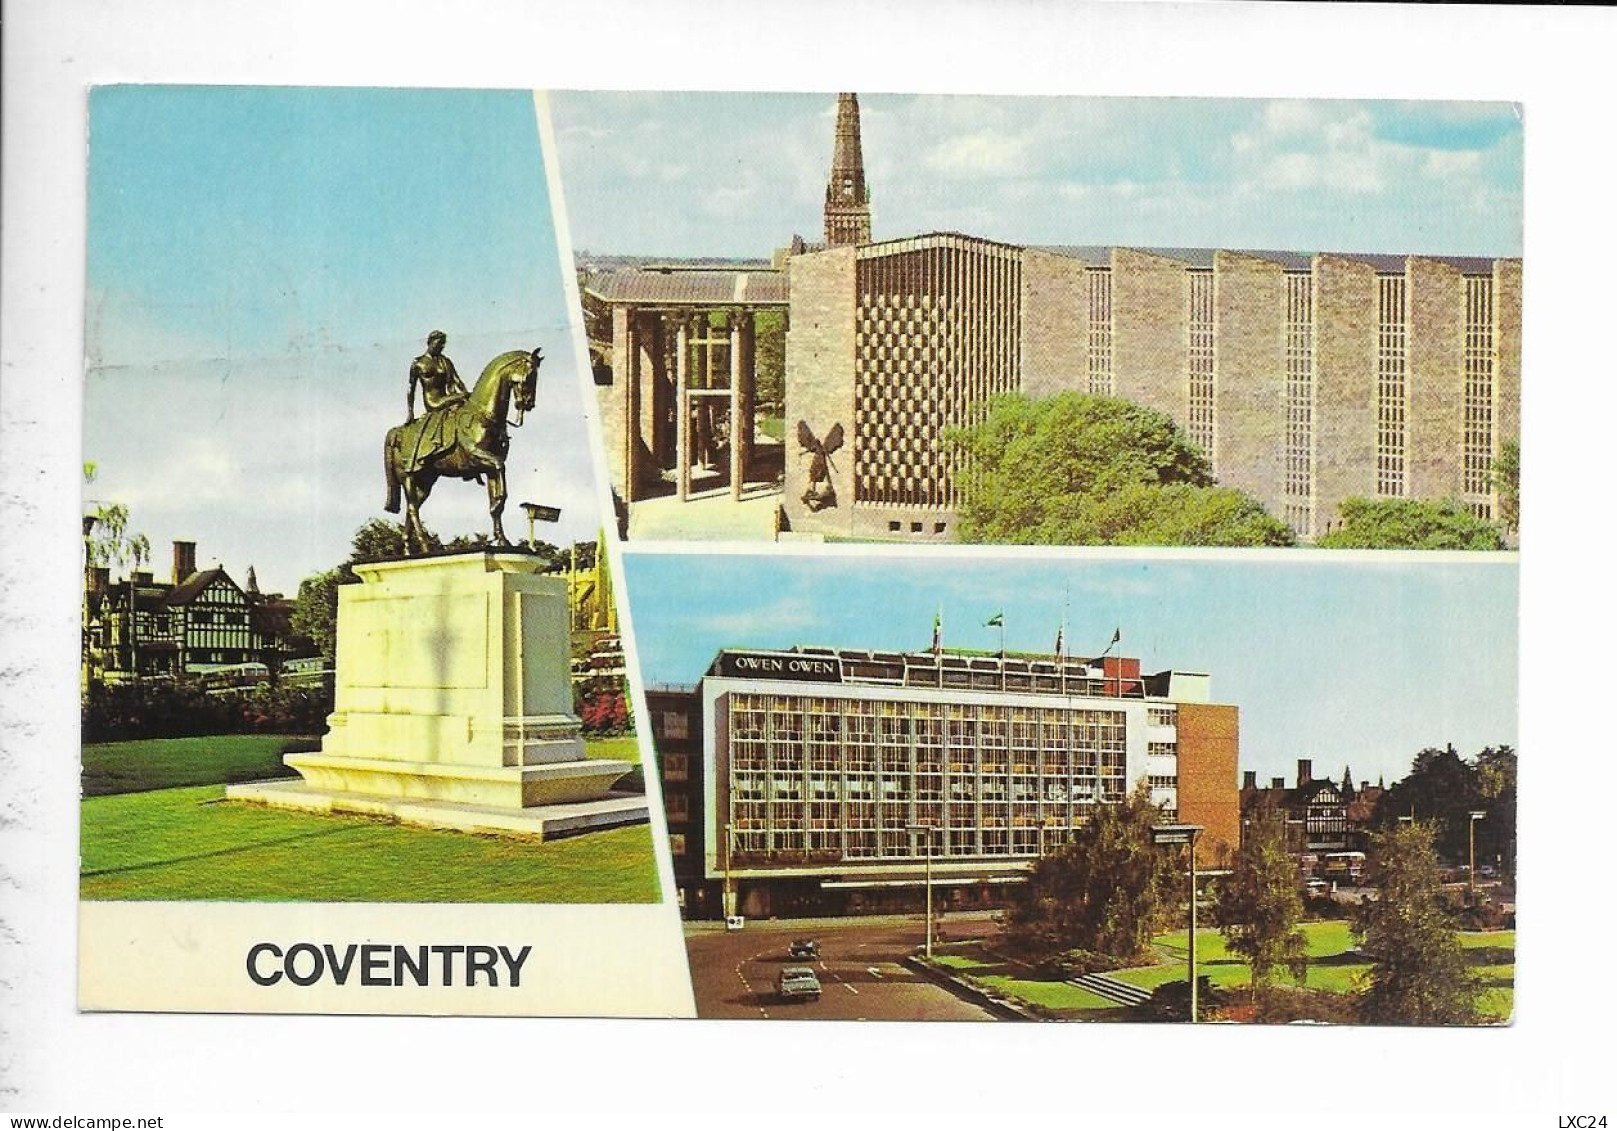 COVENTRY. - Coventry